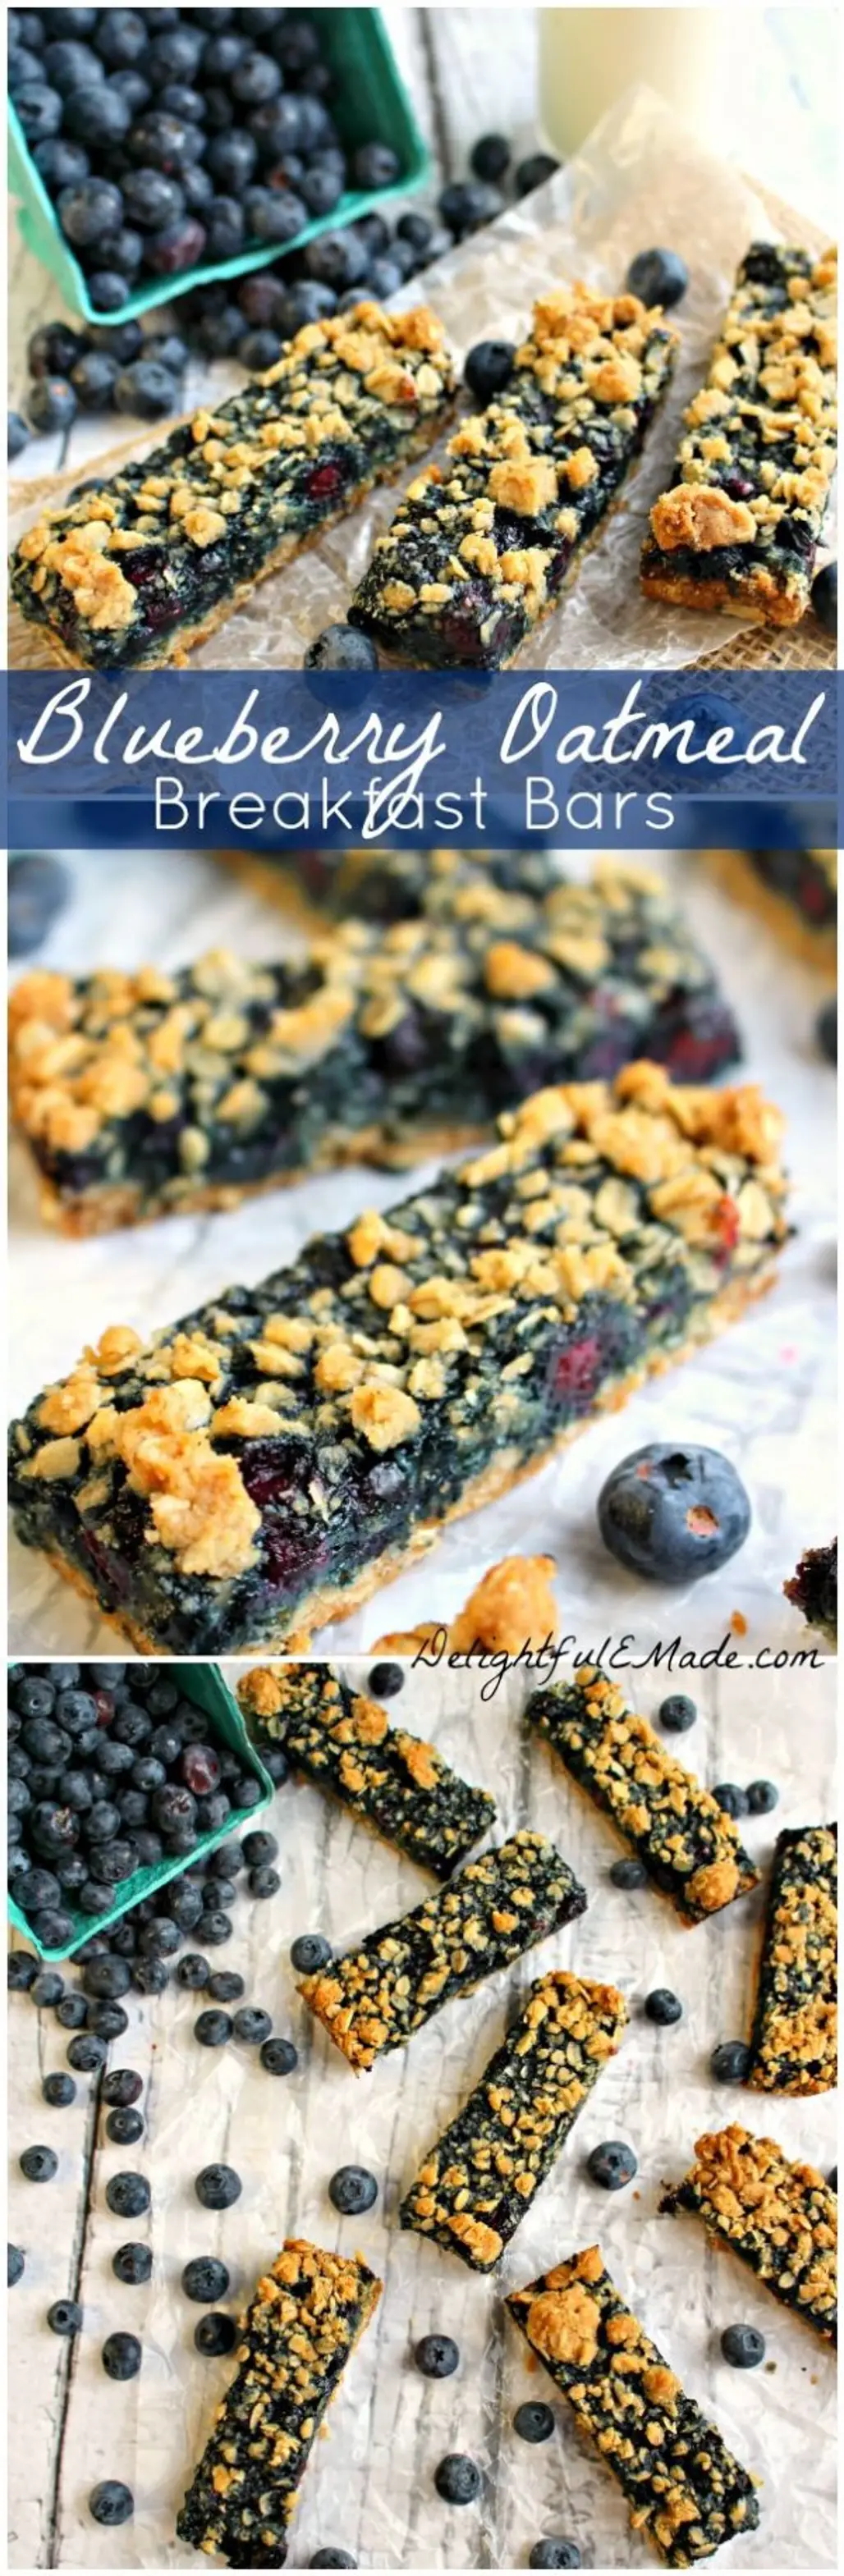 Blueberries with a Brown Sugar Oatmeal Crust